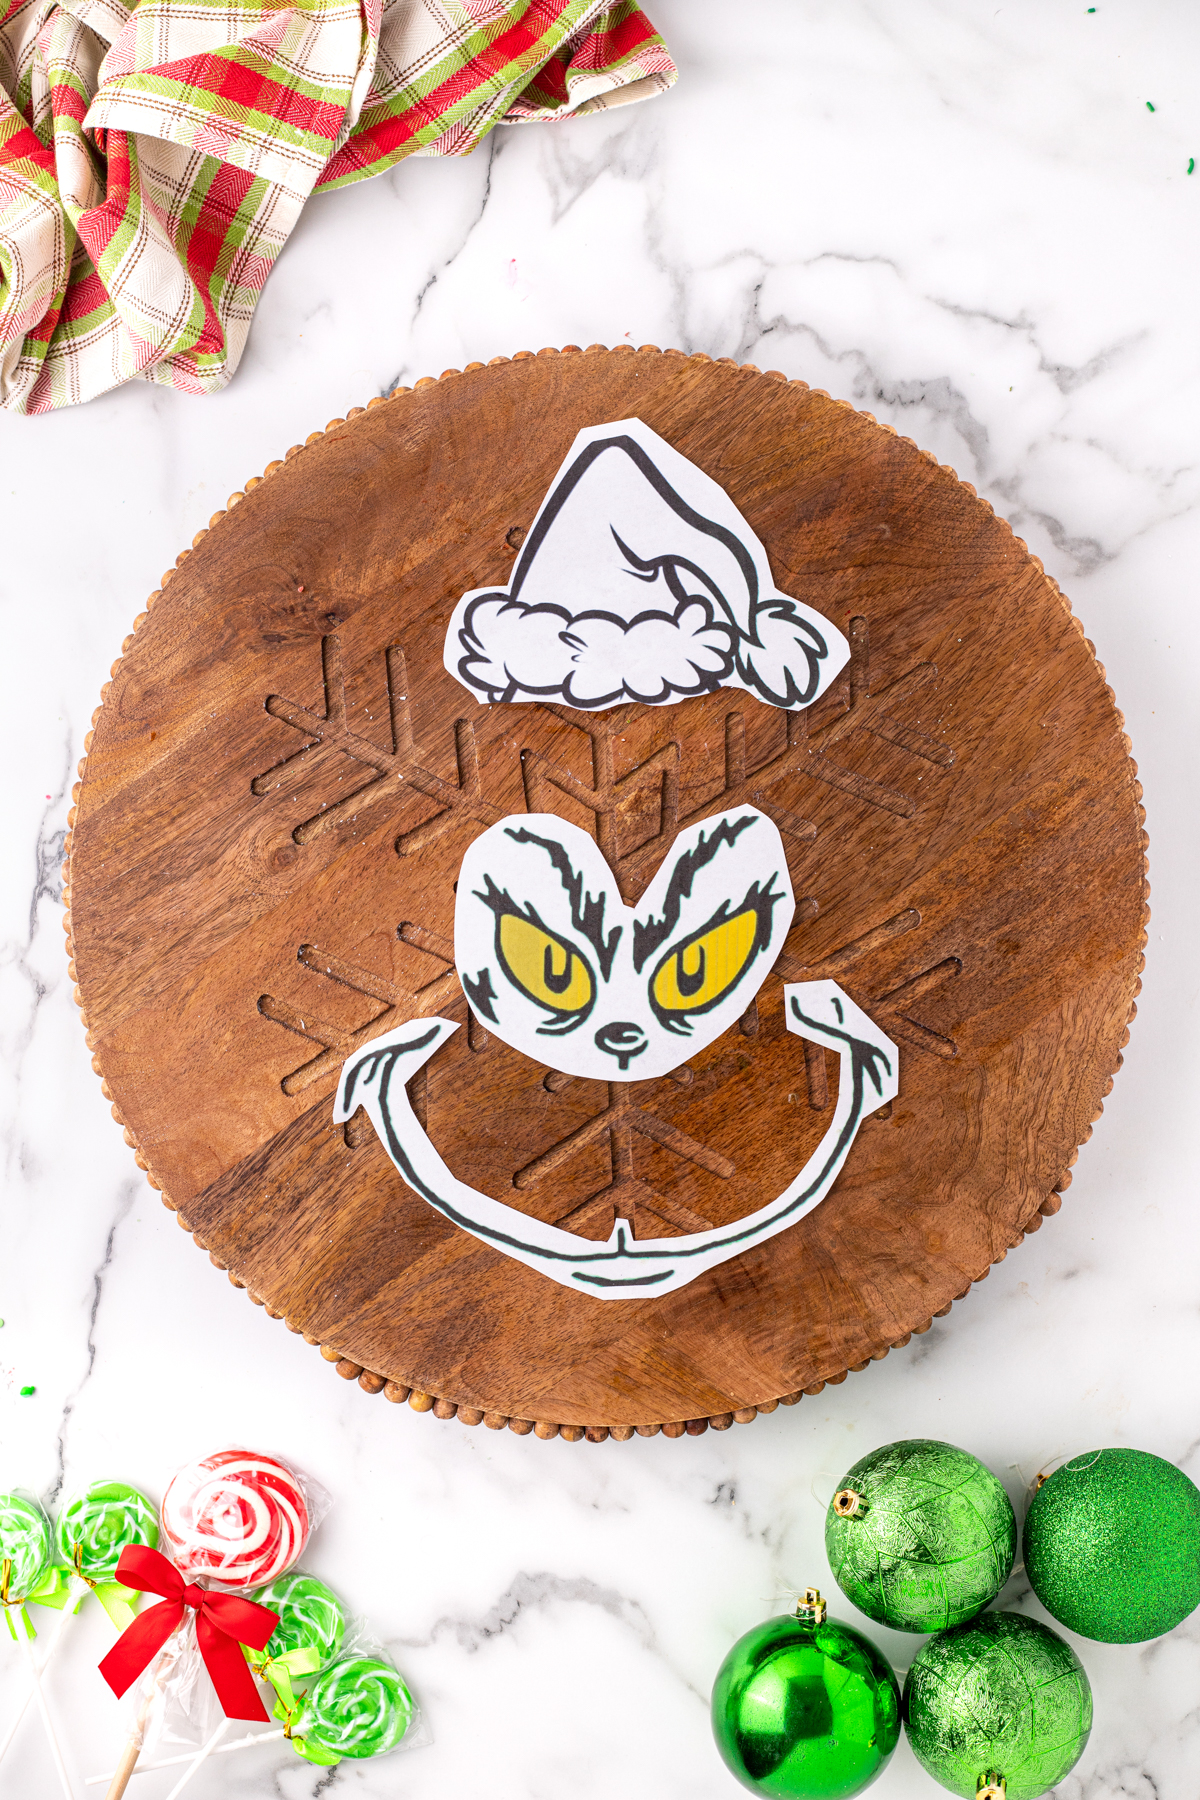 Grinch face template on a charcuterie board